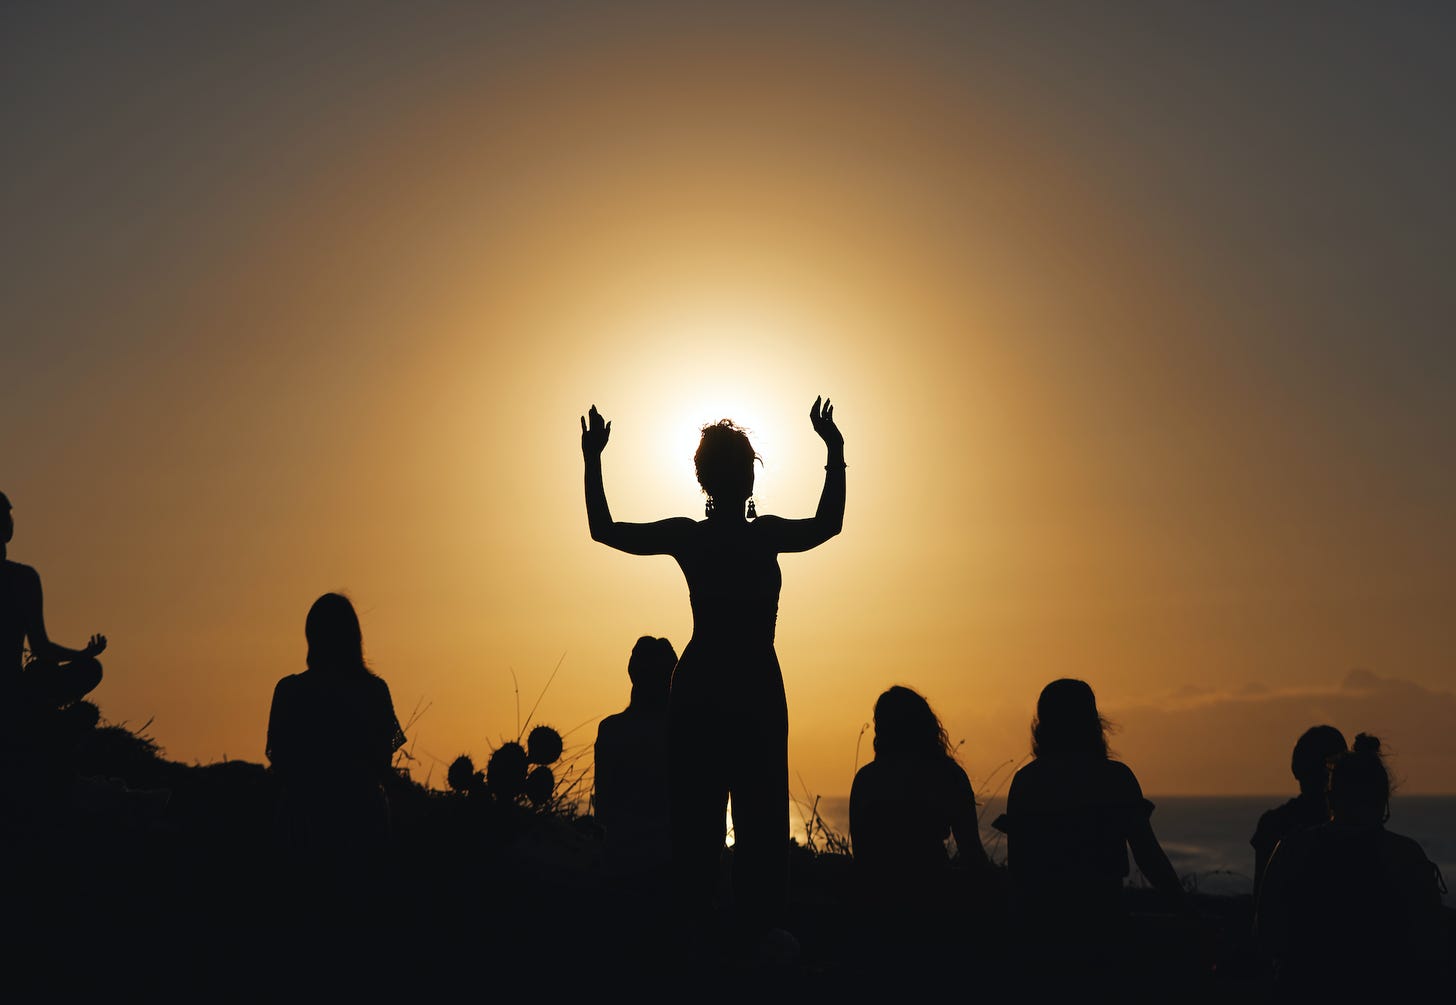 A silhouette of a person raising their hands up in front of a sunset

Description automatically generated with low confidence